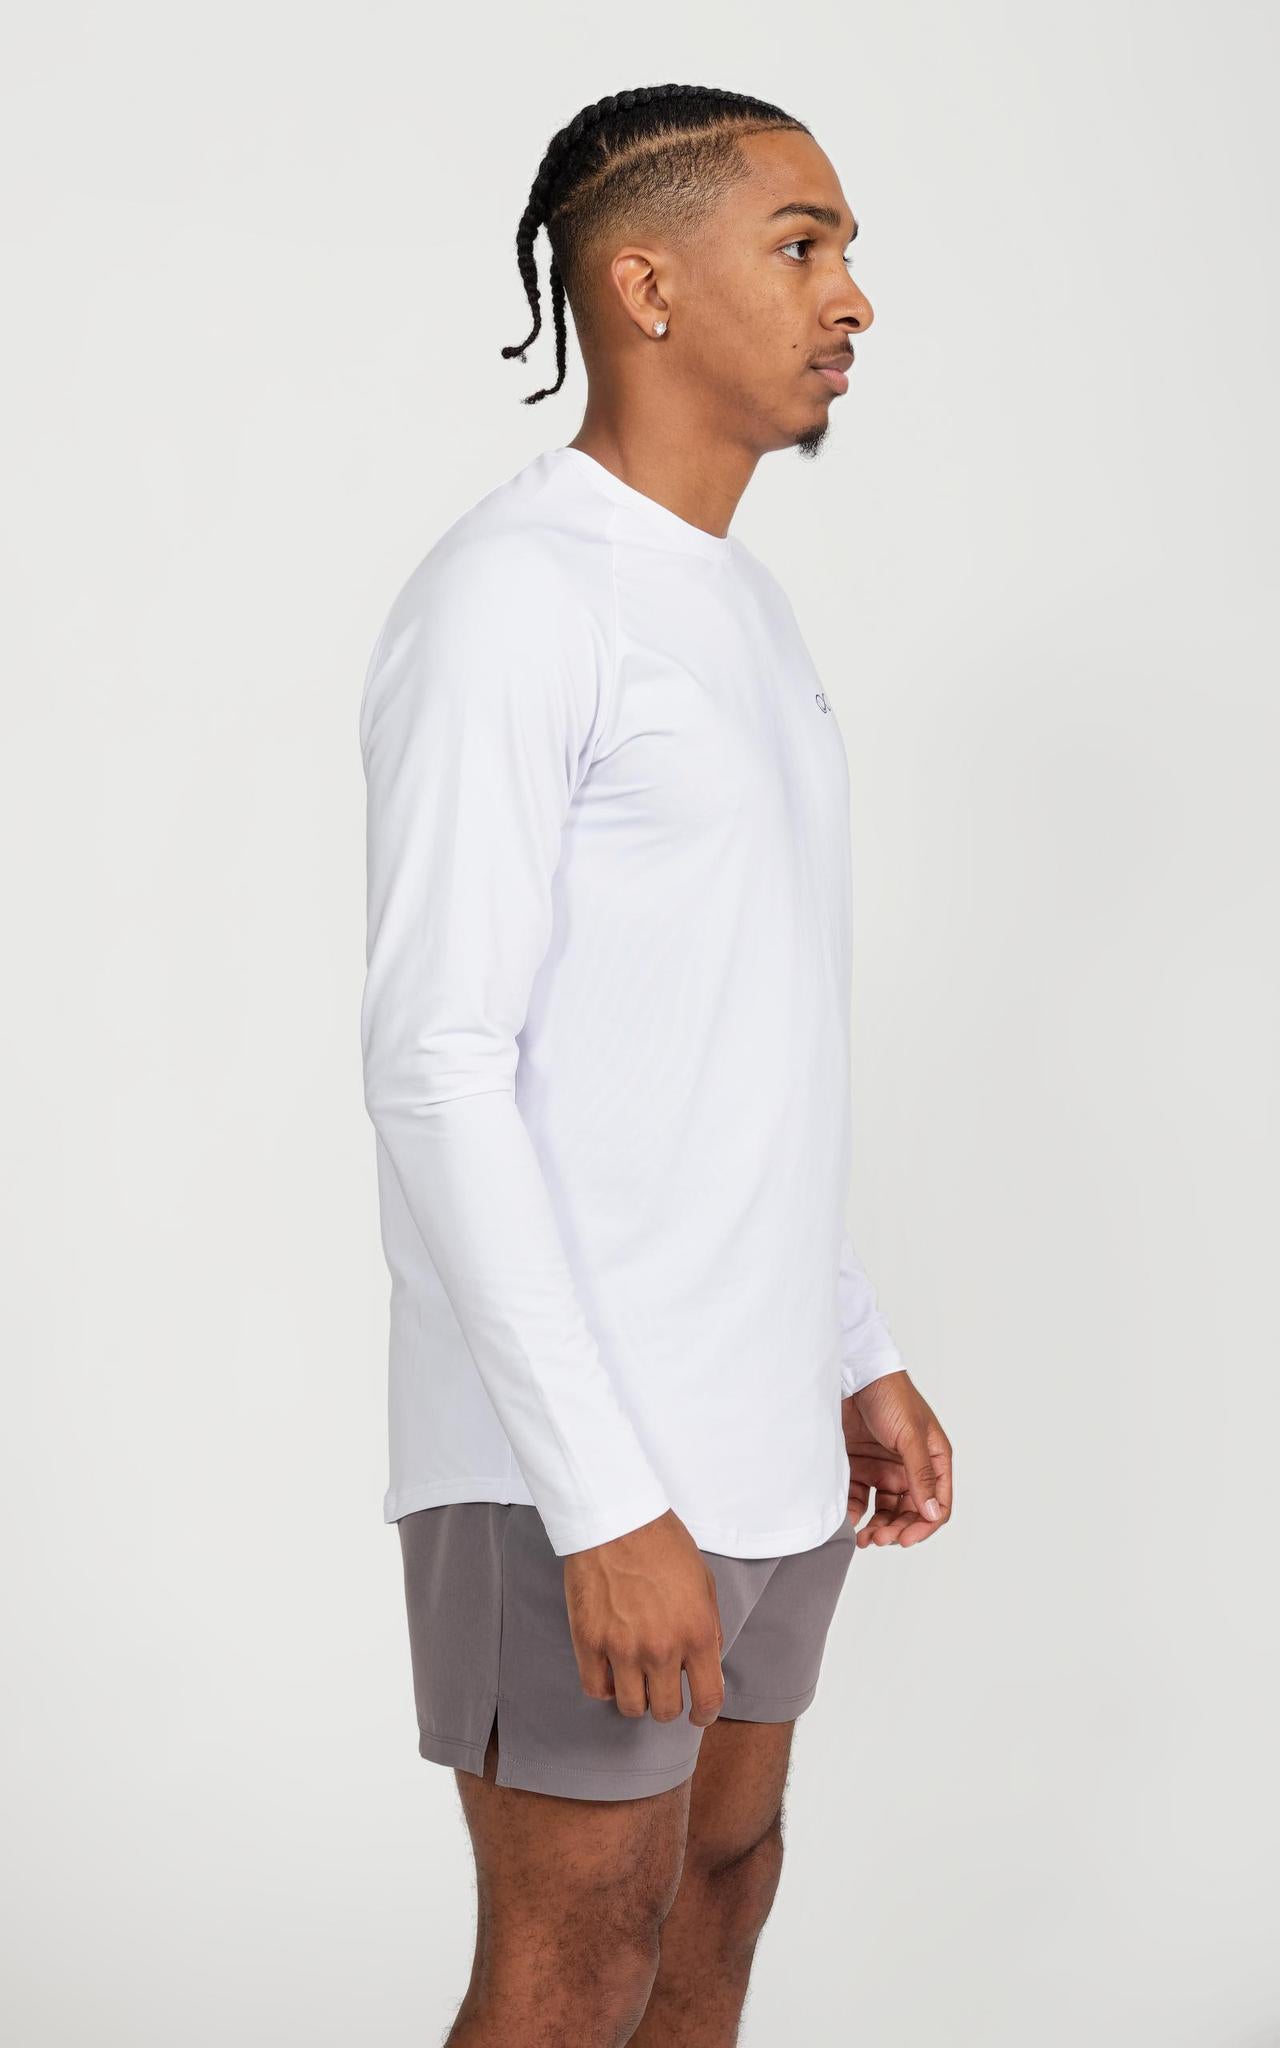 Long Sleeve Performance Cooling Shirt UPF 50 in White L